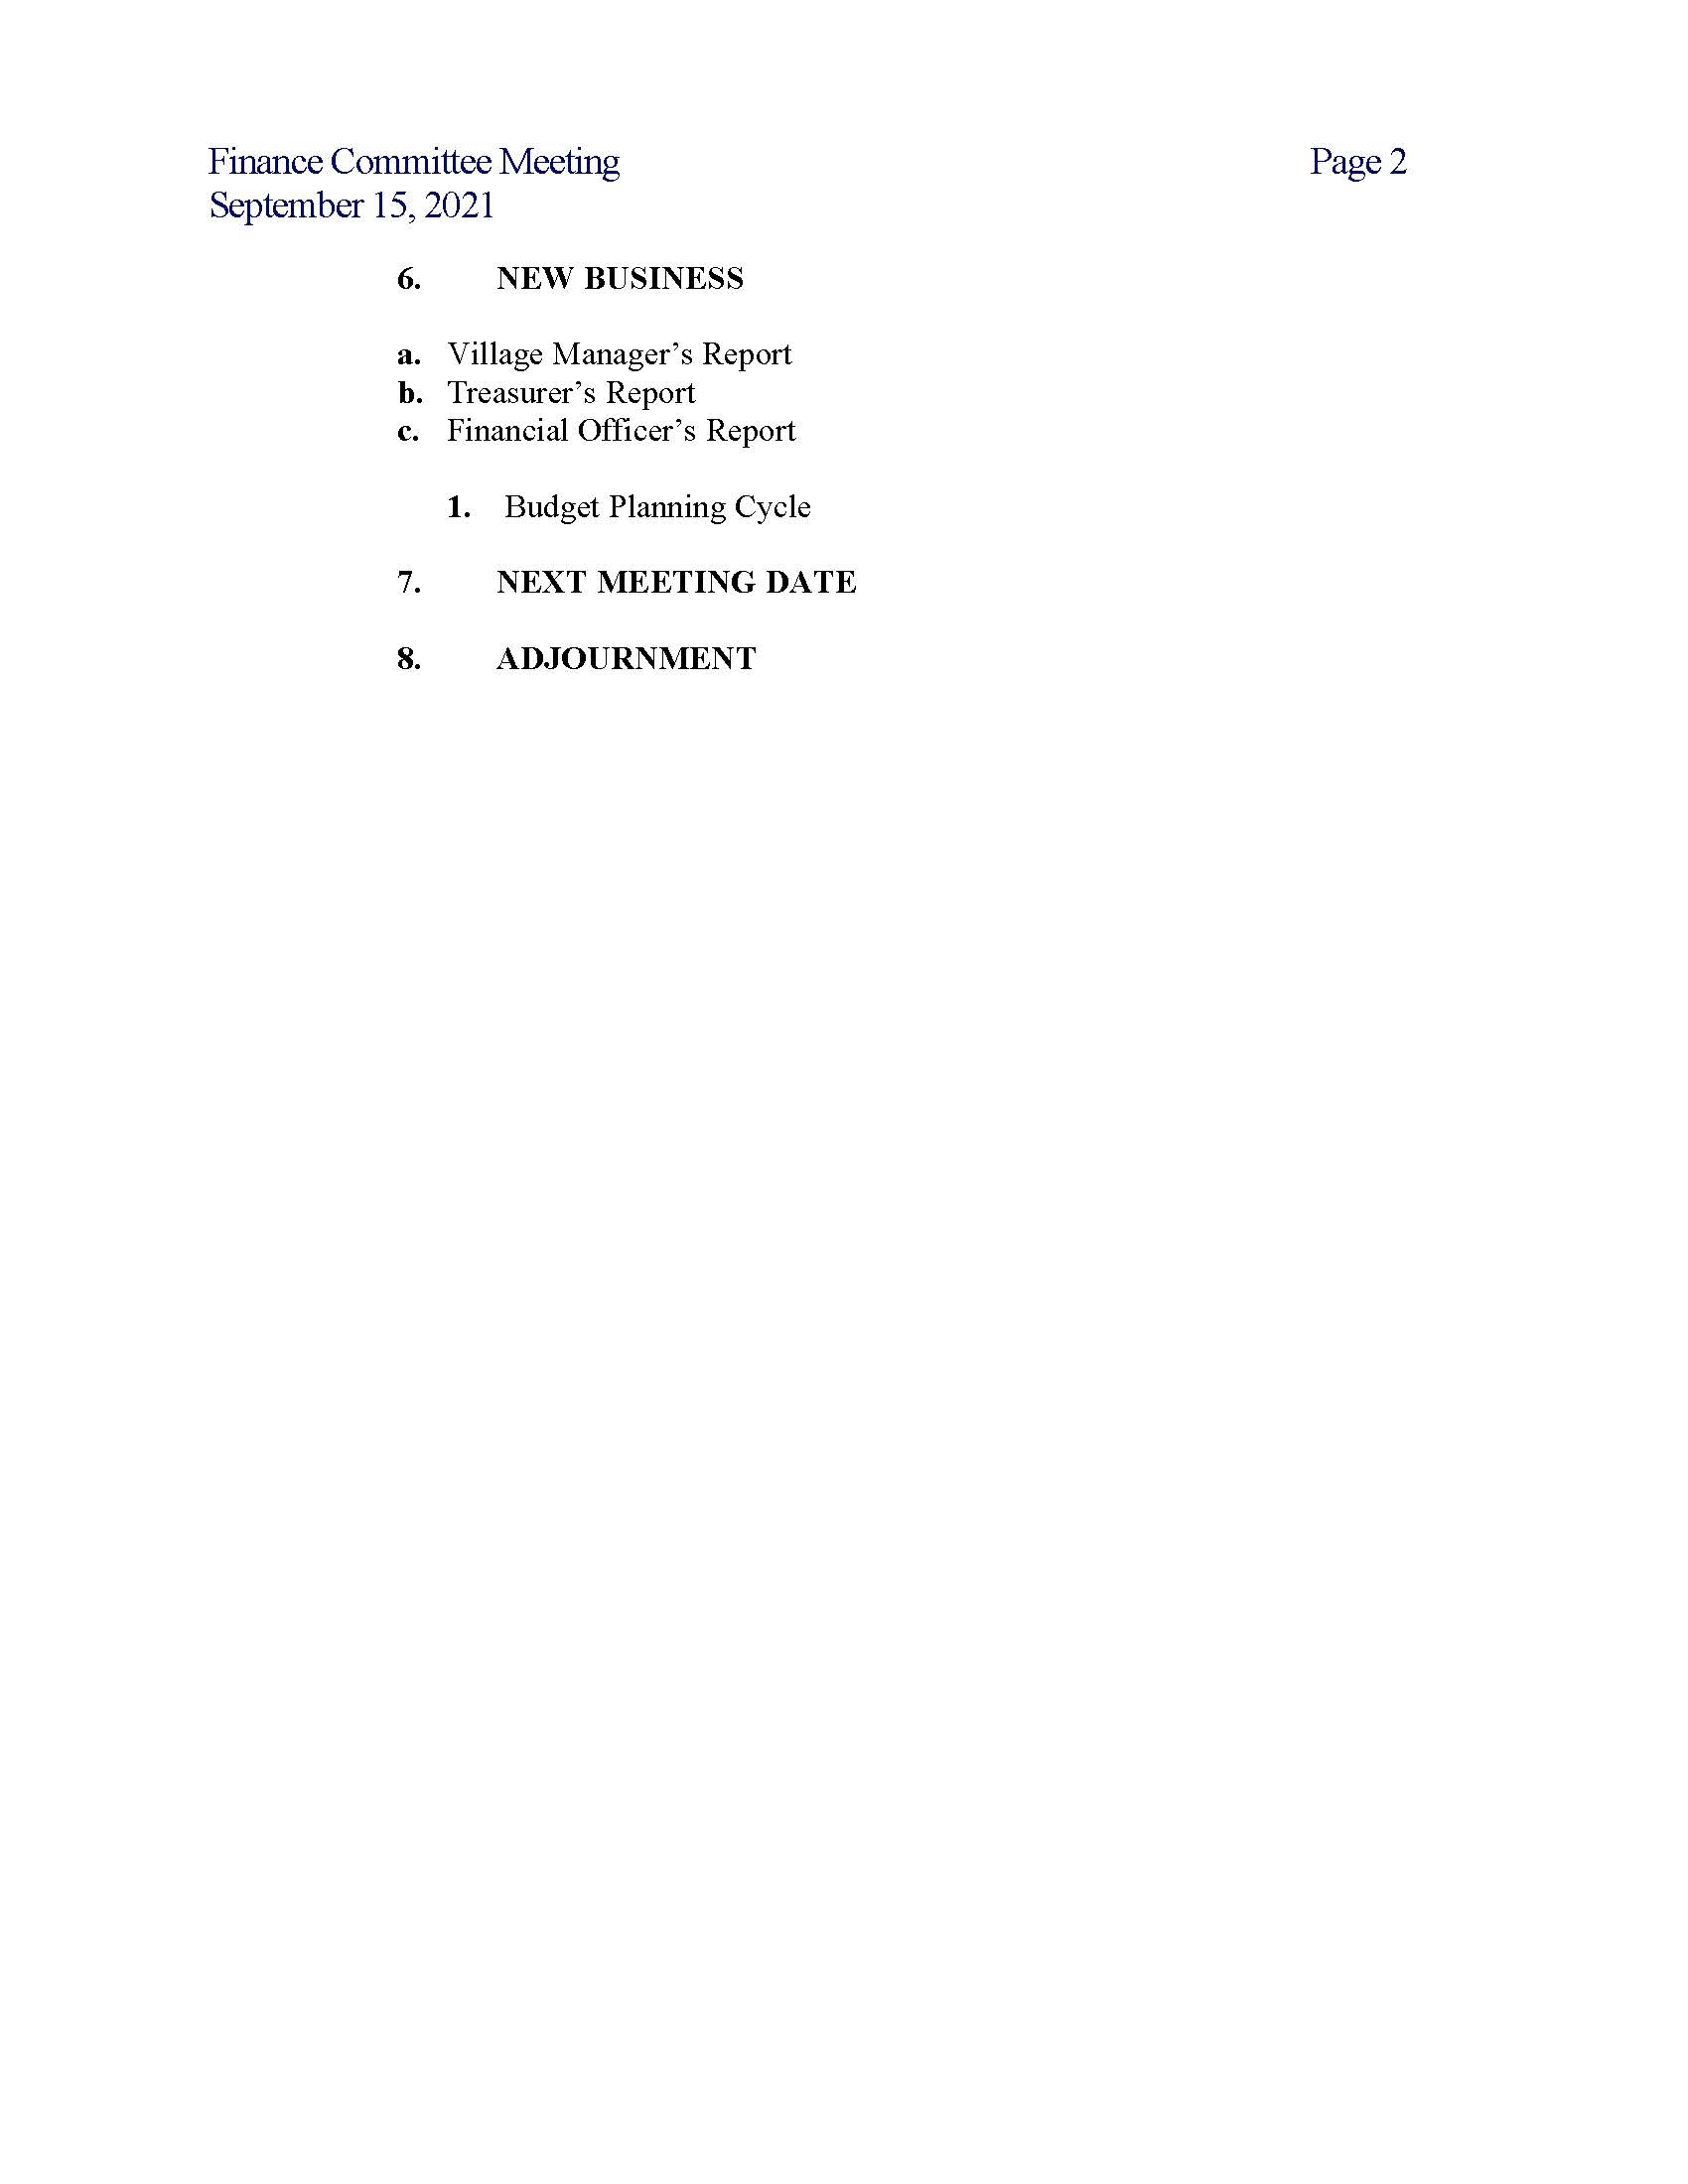 2021 (09-15) Agenda - Finance Committee Meeting_Page_2